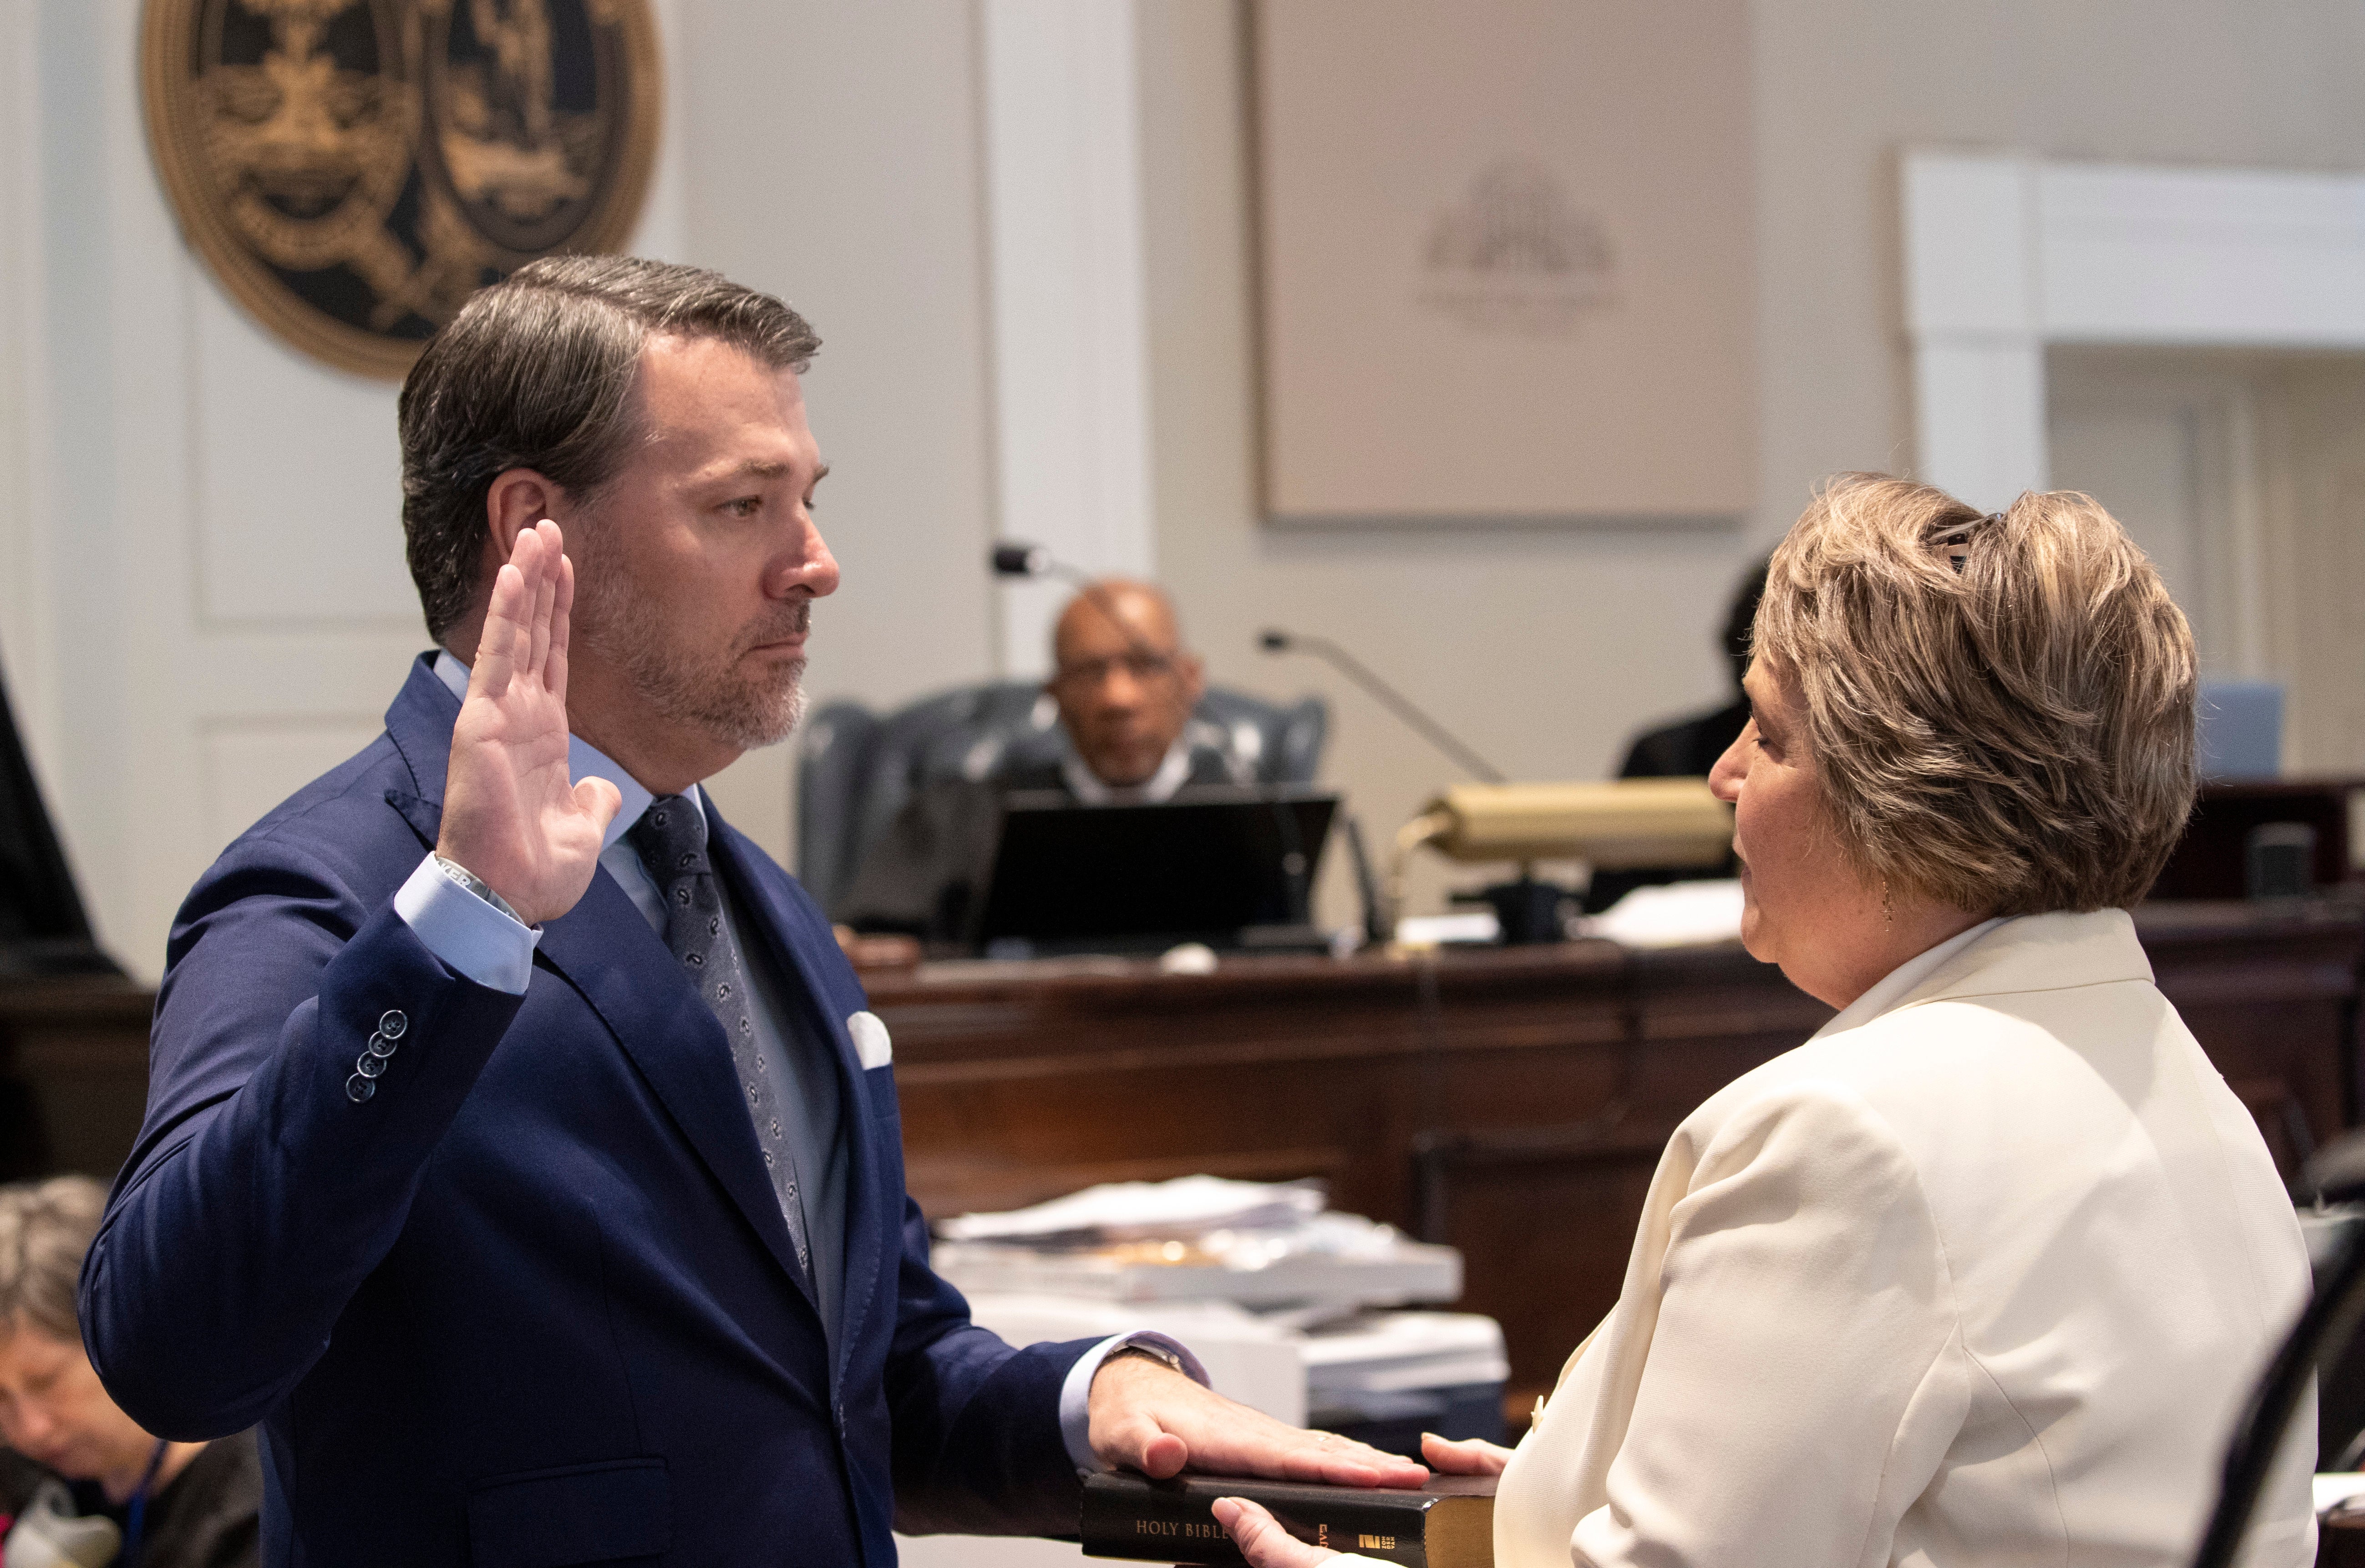 Colleton County Clerk of Court Rebecca Hill swears in witness at Murdaugh trial